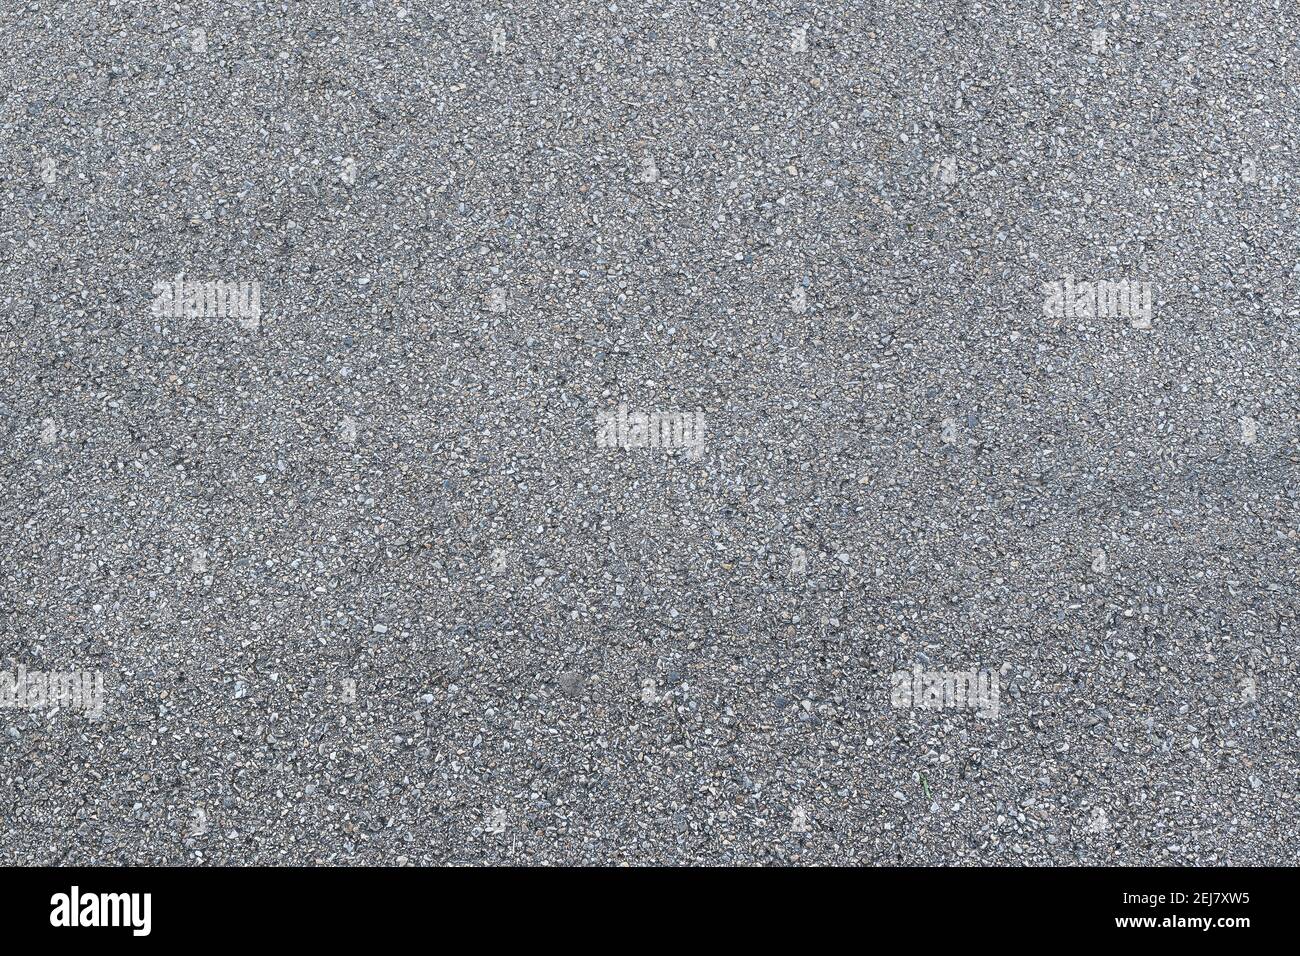 Concrete paving slab texture, top view surface as background Stock Photo